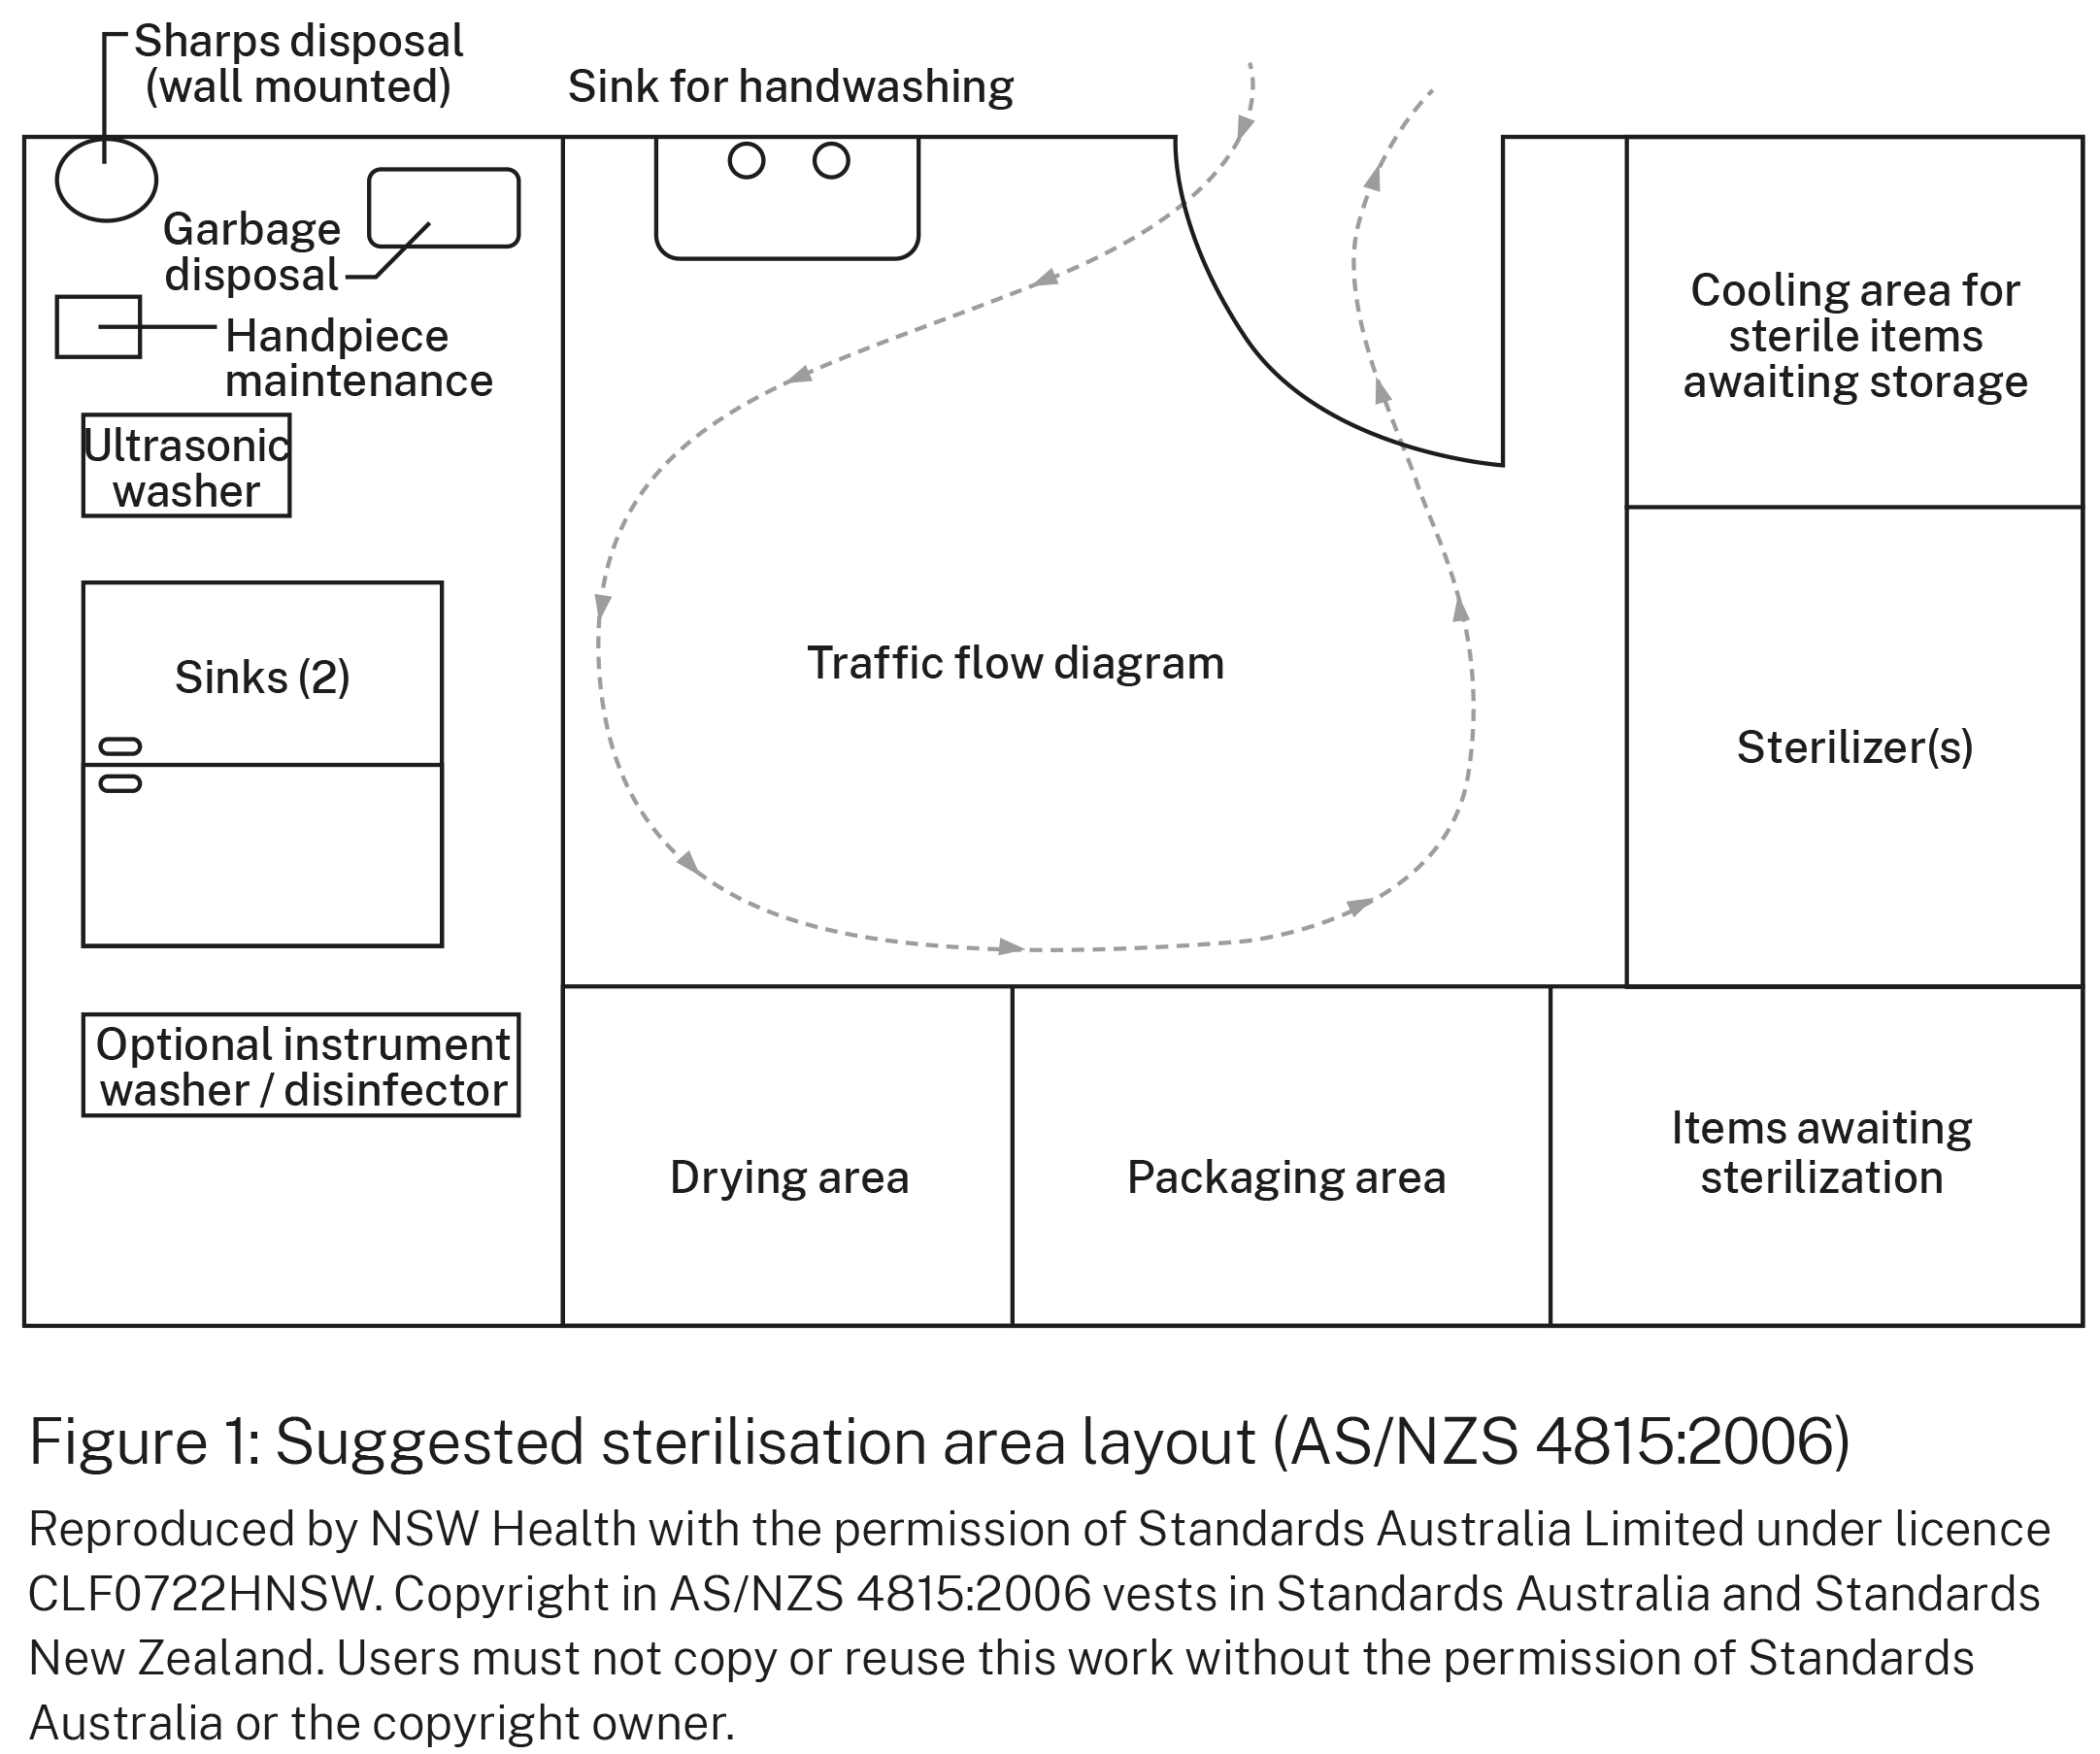 Diagram showing the suggested sterilisation area layout from Standard AS/NZS 4816:2006, relevant to the design and construction 